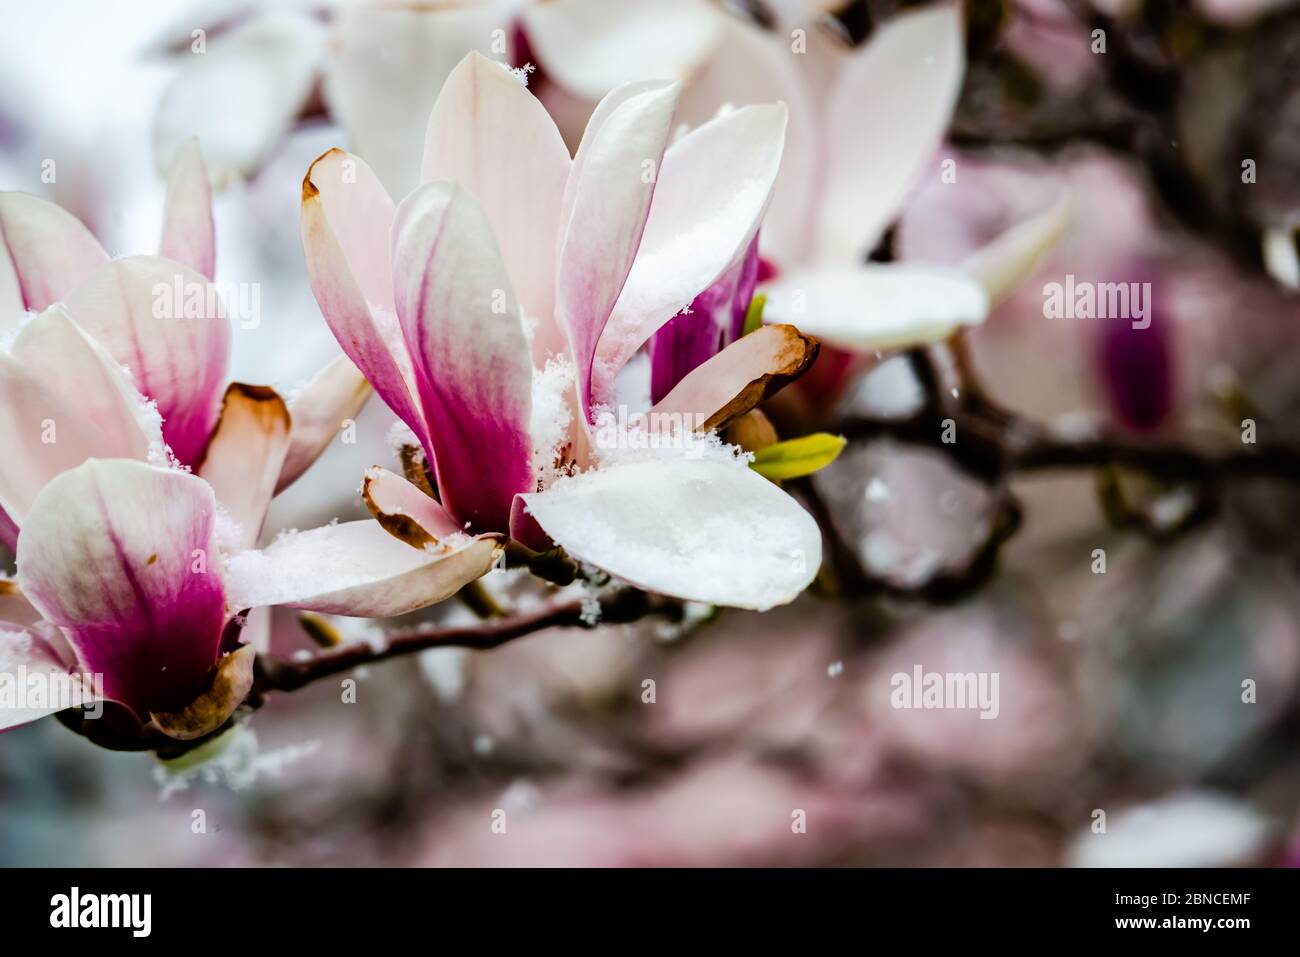 Magnolia flowering time, close-up photography Stock Photo